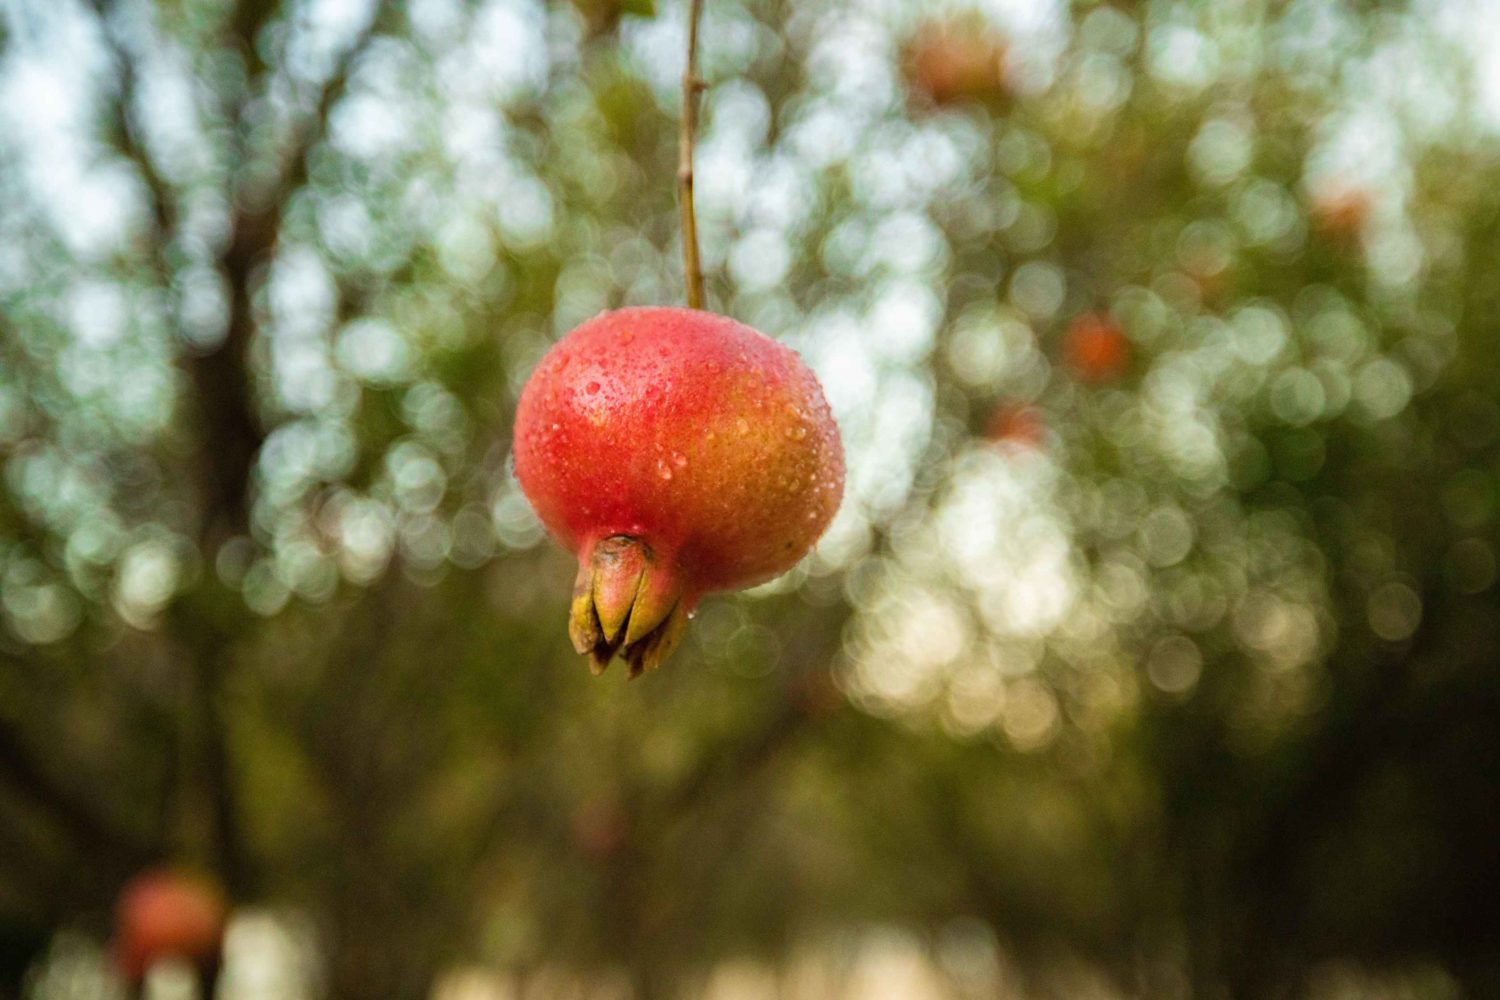 From our farms: Why our farms grow pomegranates